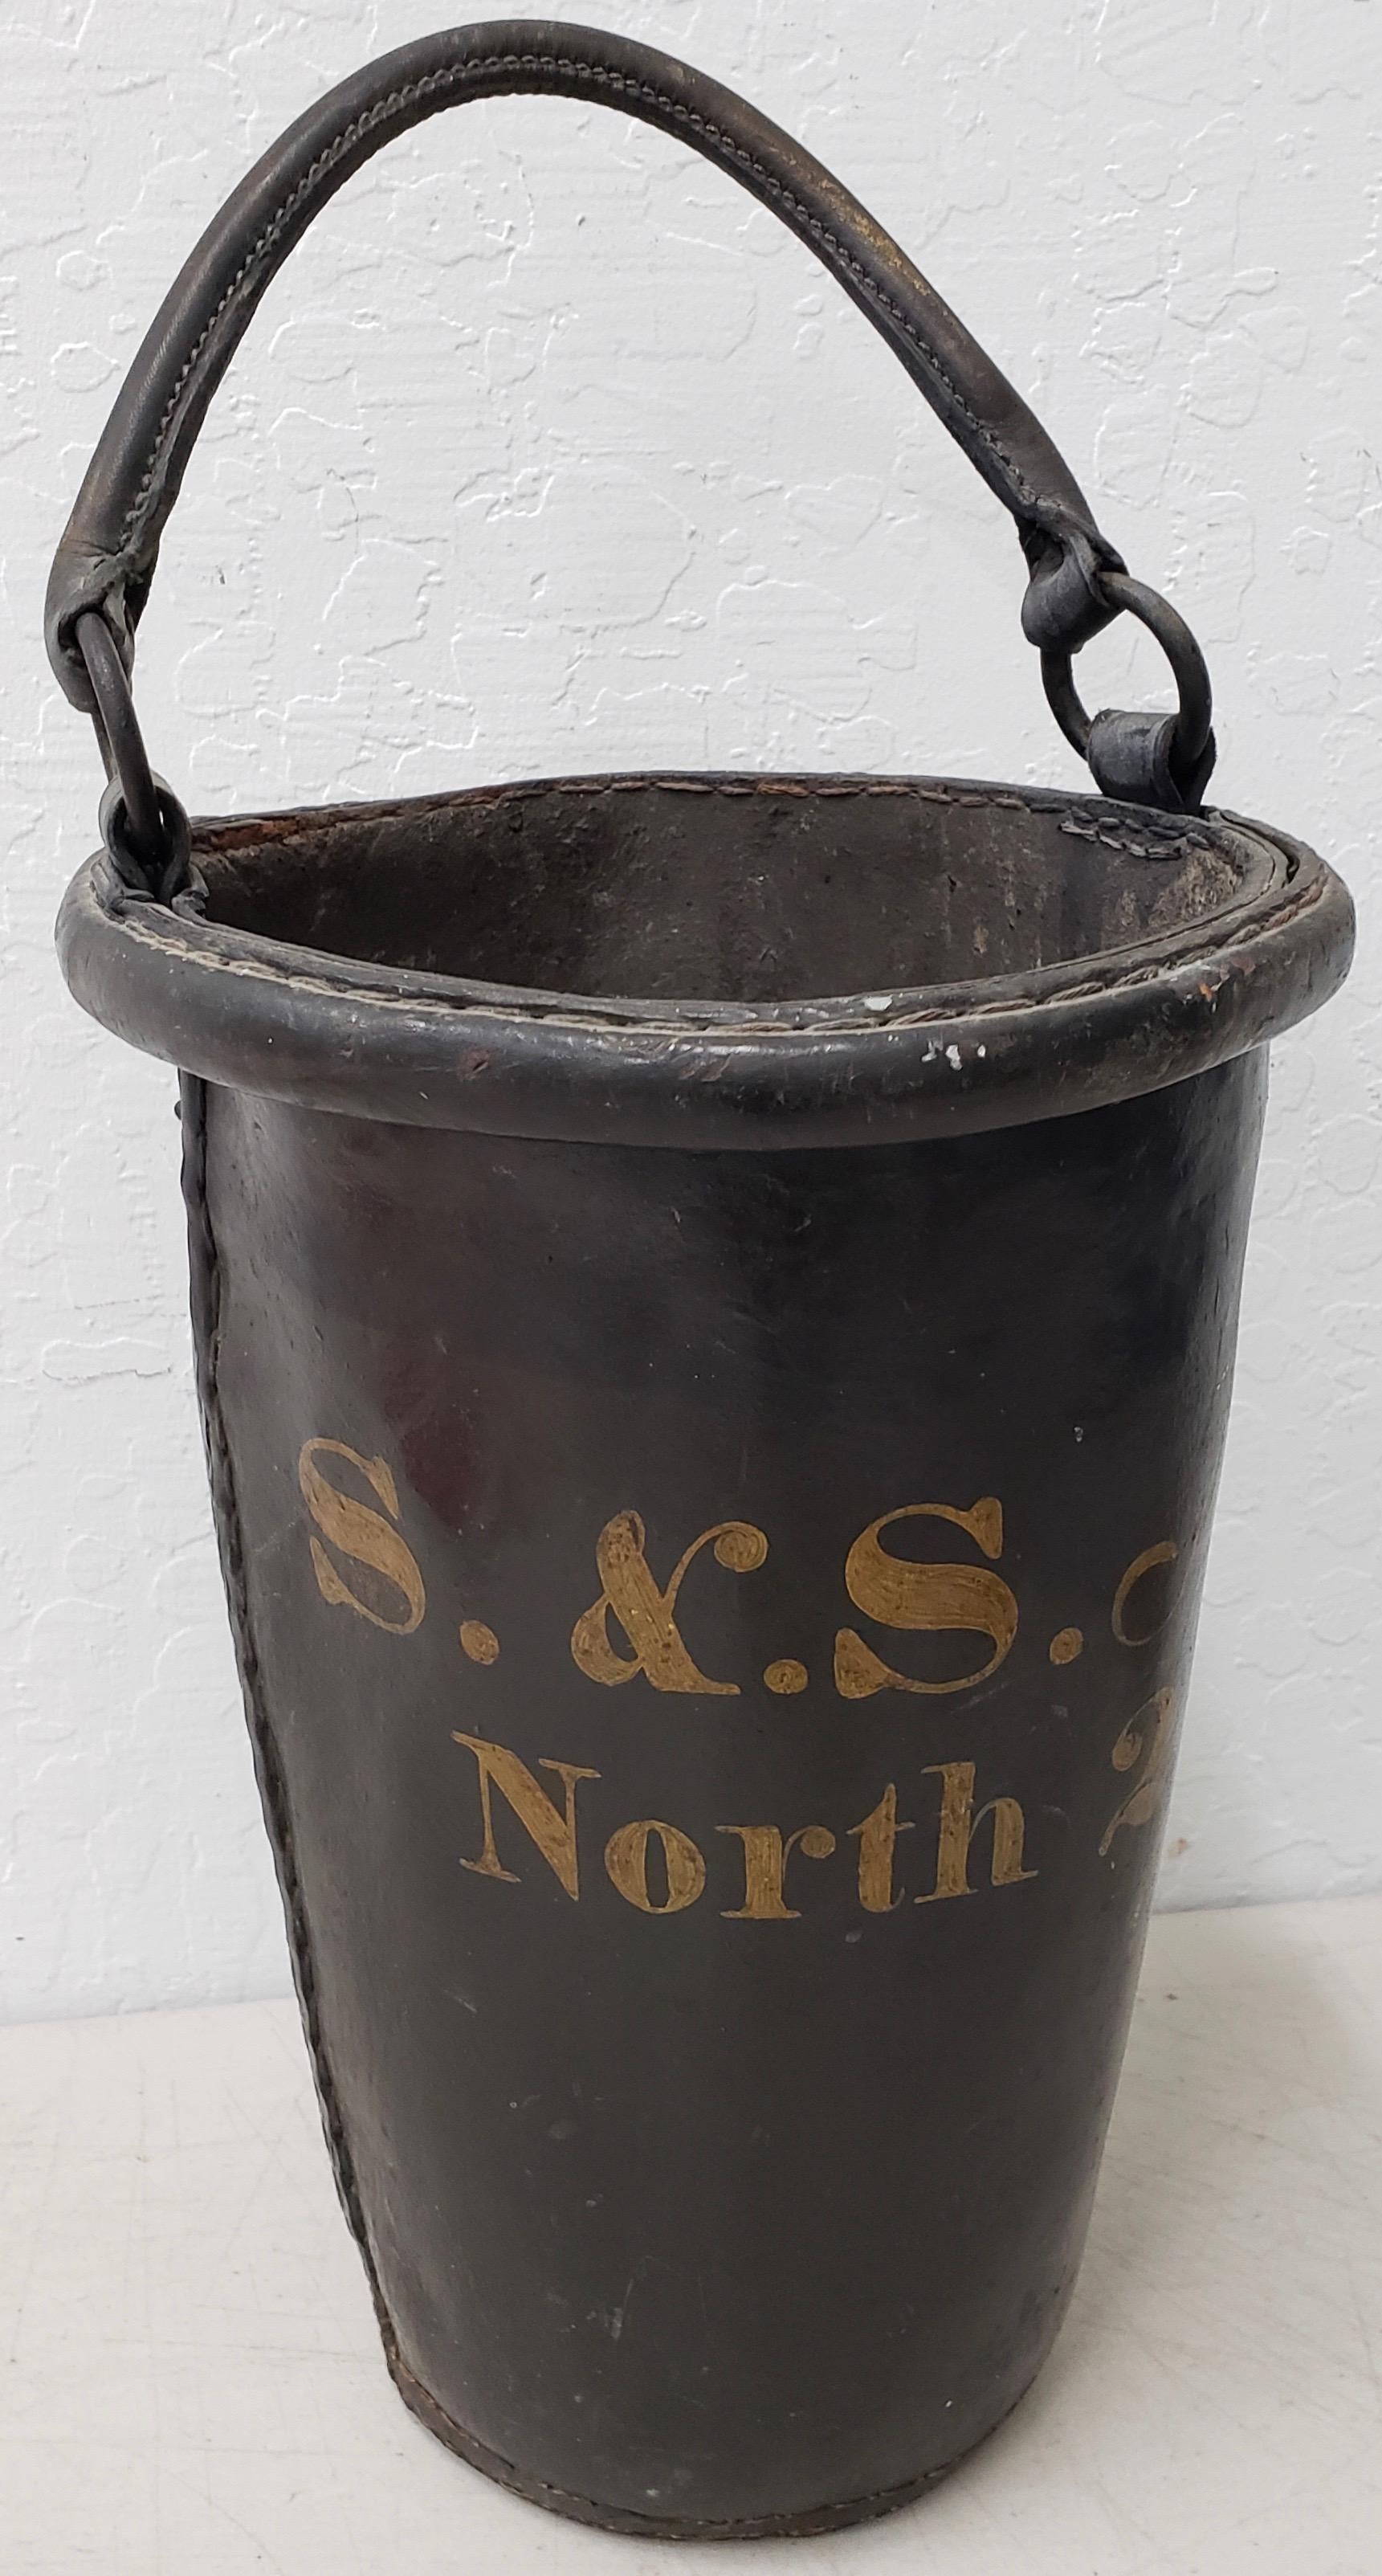 Antique 19th century English leather fire bucket,

circa 1880s

Handmade fire bucket with hand painted station number

Dimensions 6